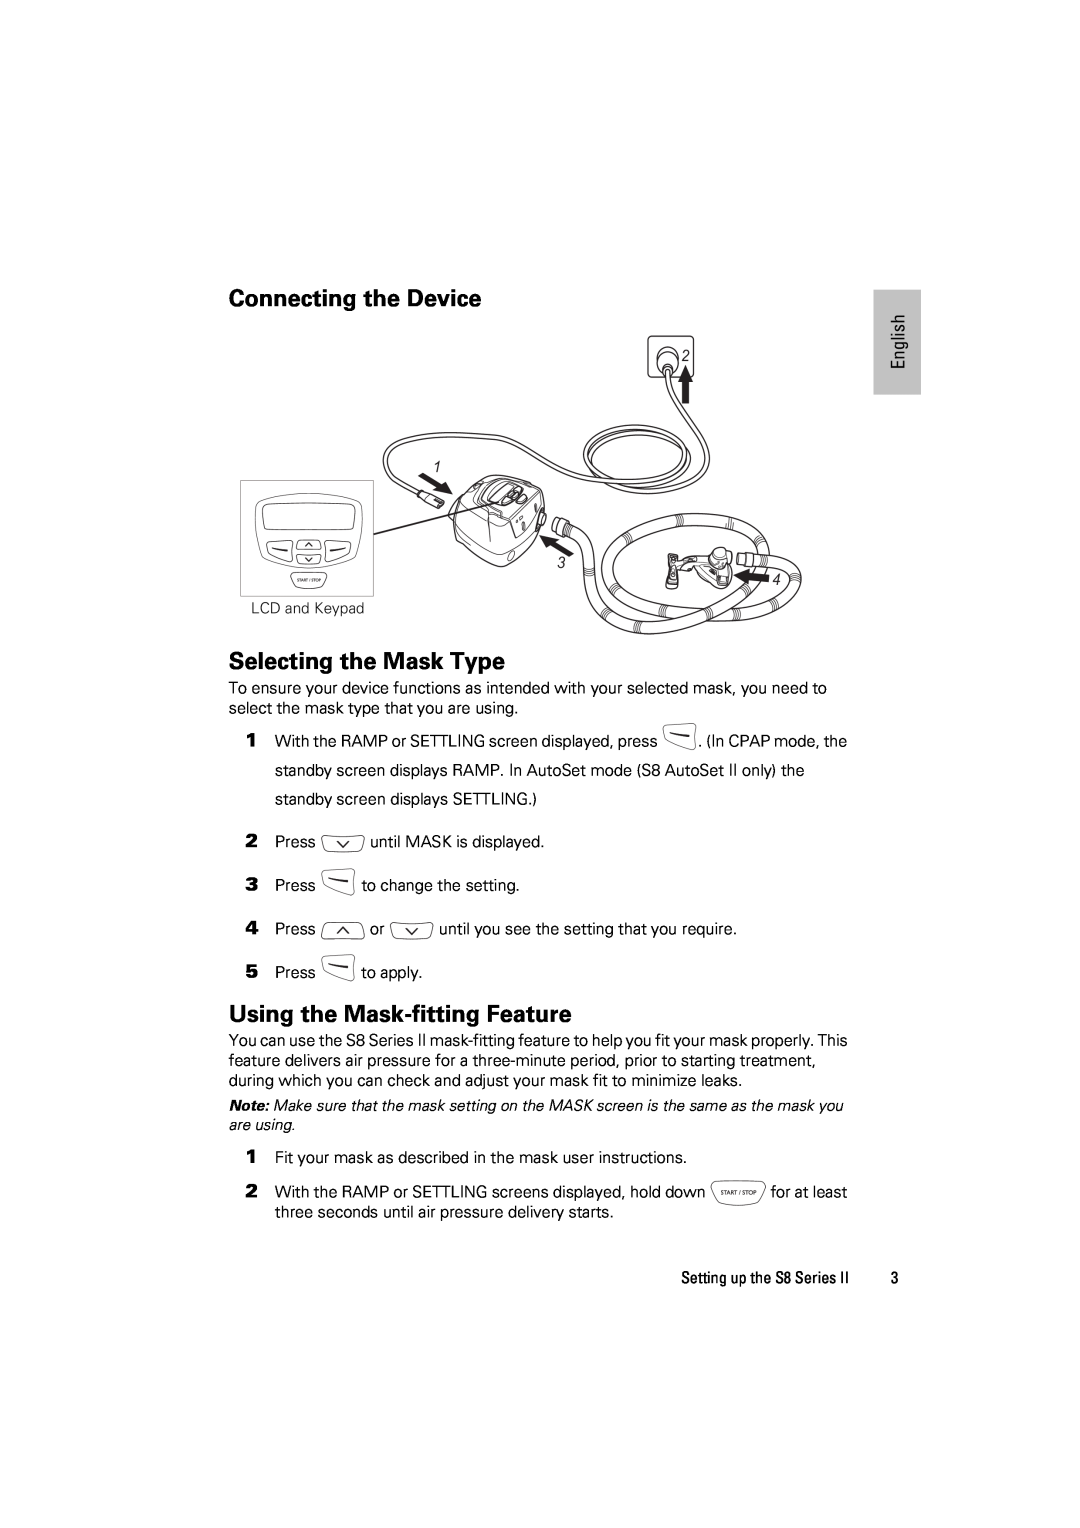 ResMed s8 manual Connecting the Device, Selecting the Mask Type, Using the Mask-fittingFeature, English, 2 1 